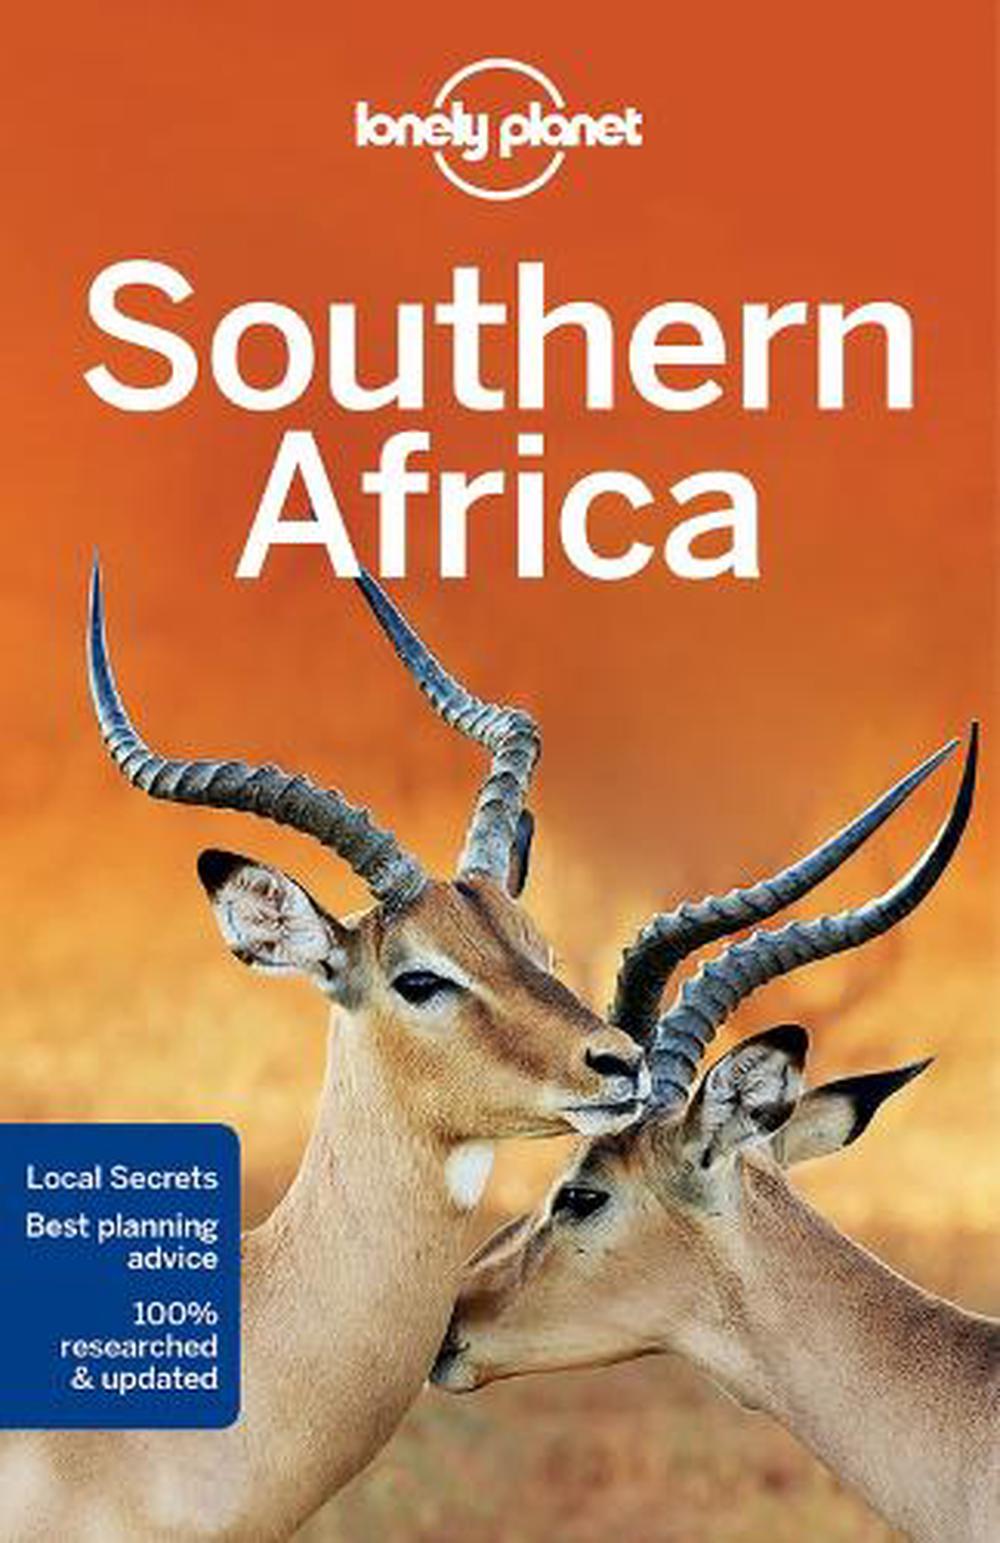 The　by　Lonely　Nile　9781786570413　Buy　Planet　online　Southern　Lonely　Africa　Planet,　Paperback,　at